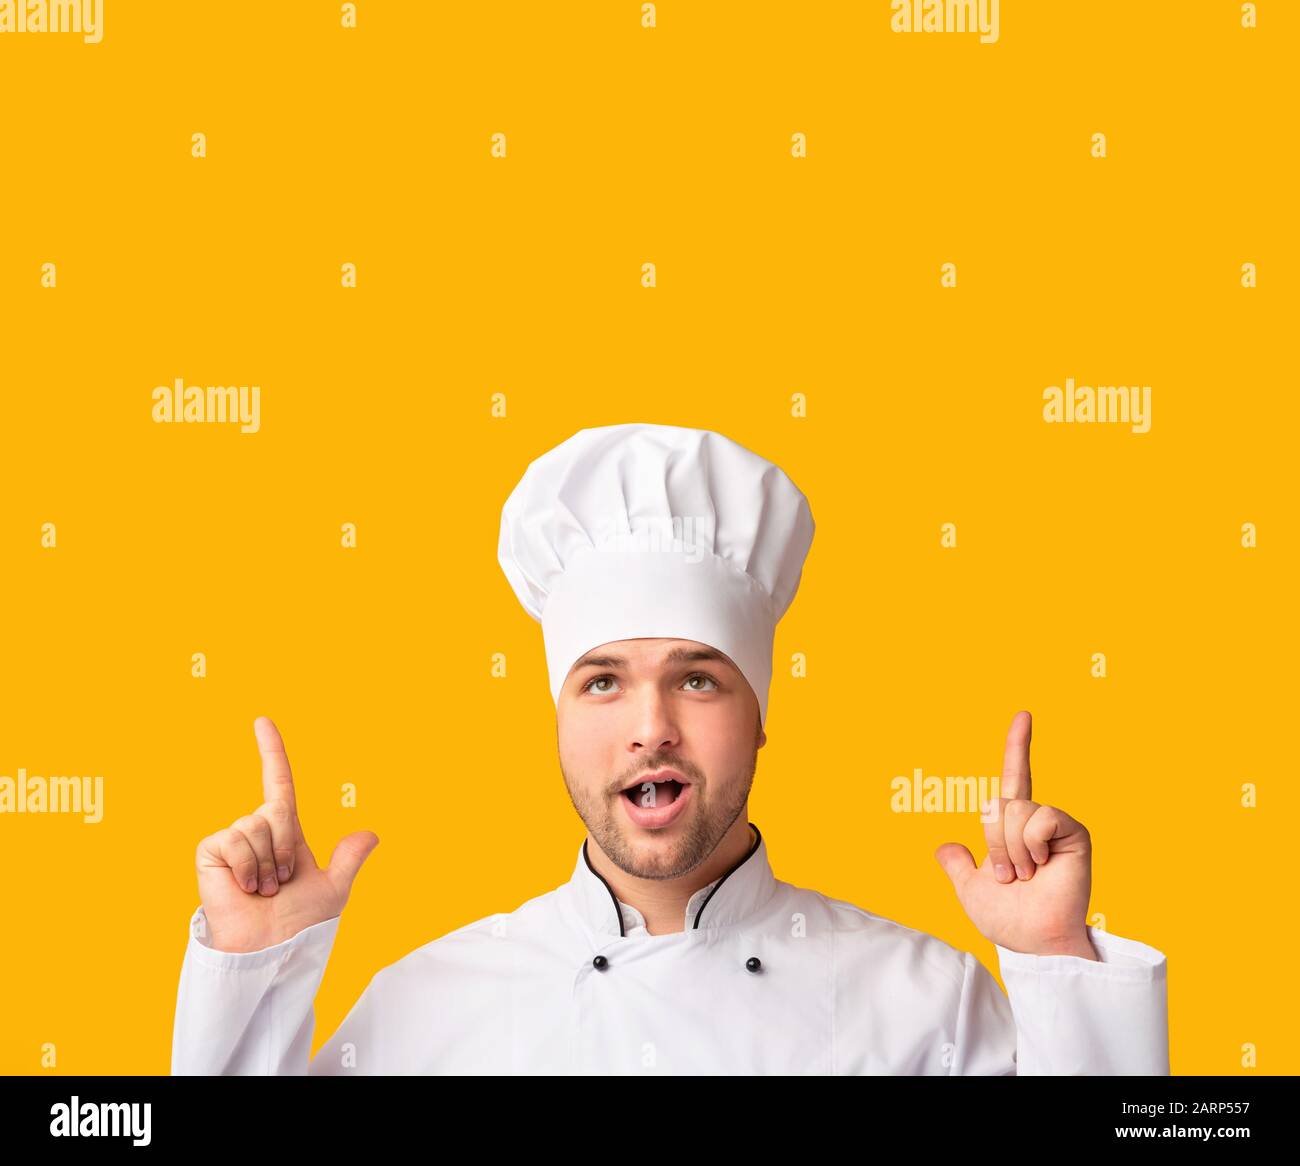 Cook Man Pointing Fingers Up Over Yellow Background, Studio Shot Stock Photo